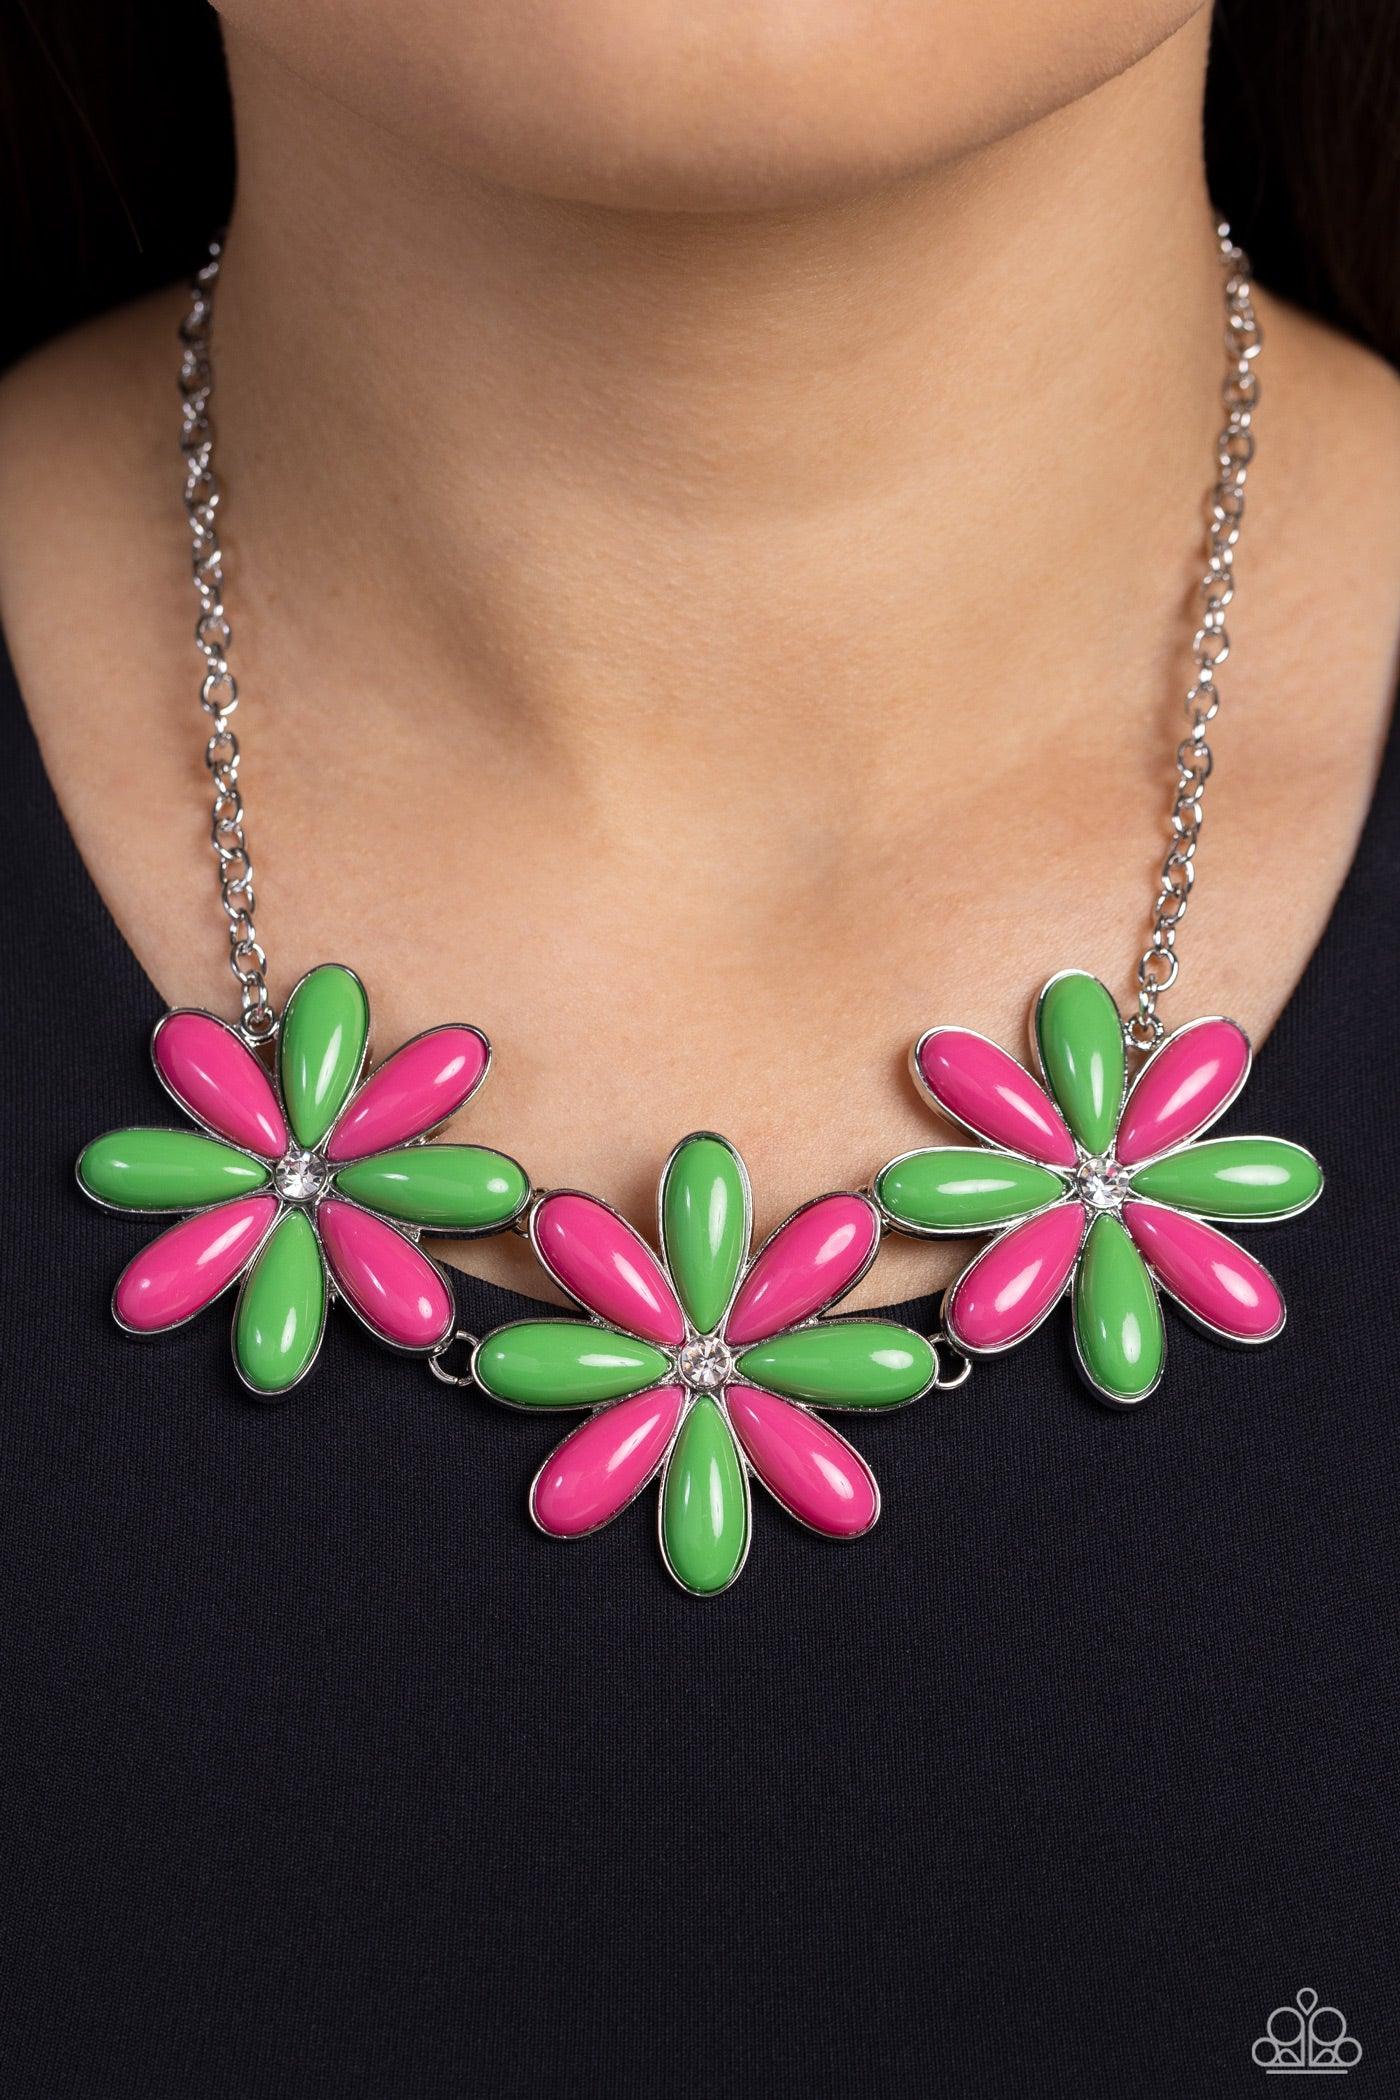 Paparazzi Accessories - Bodacious Bouquet - Green Necklace - Bling by JessieK